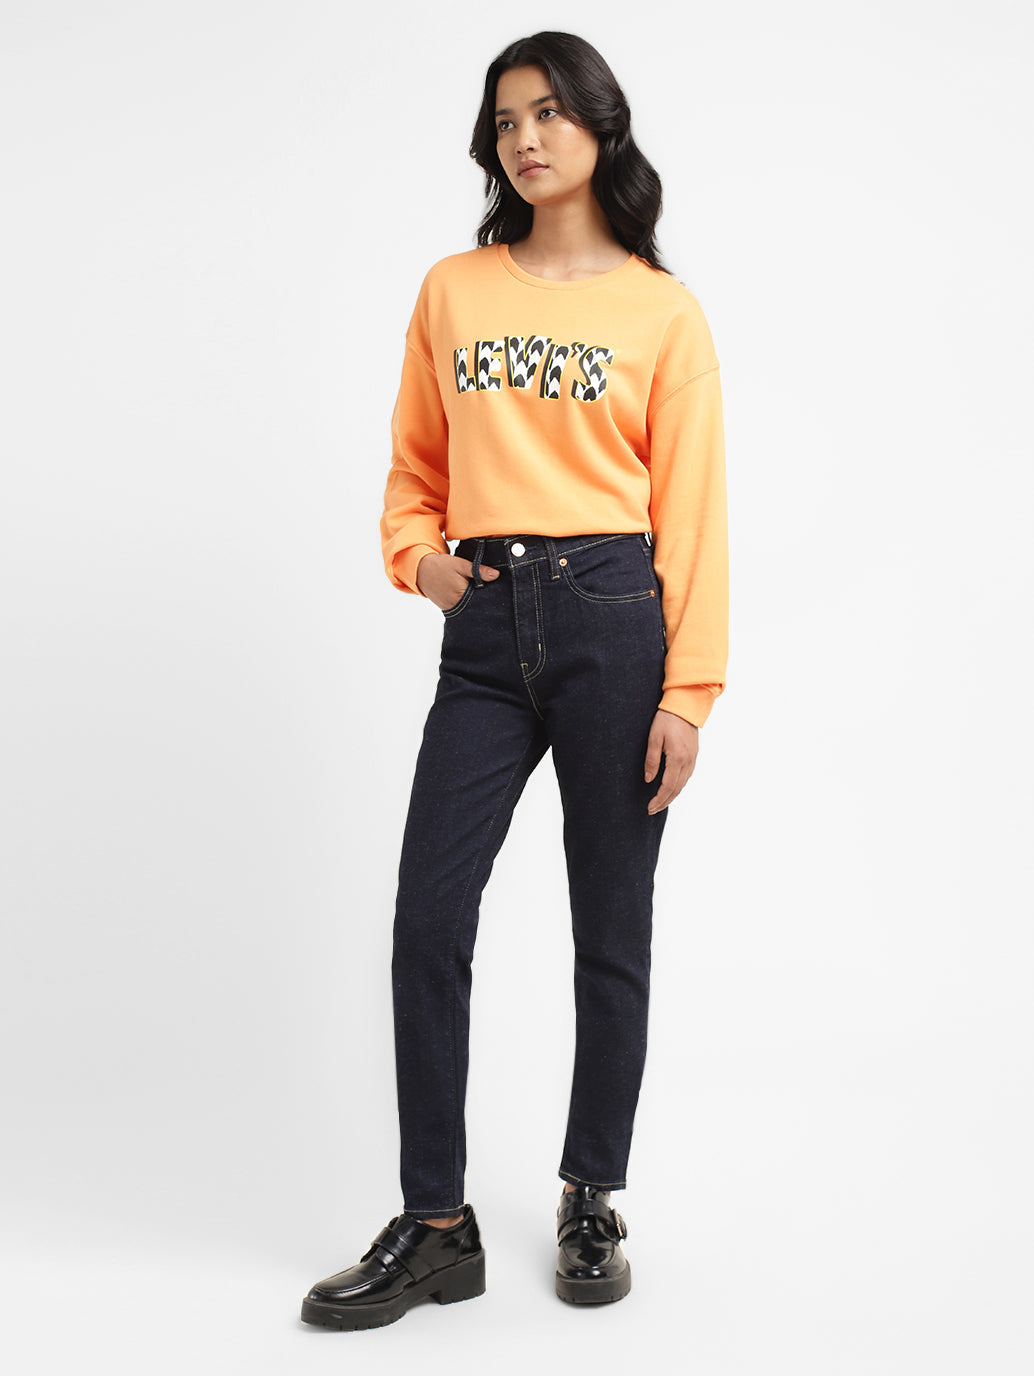 Shop Stradivarius Women's Co-Ord Sets up to 55% Off